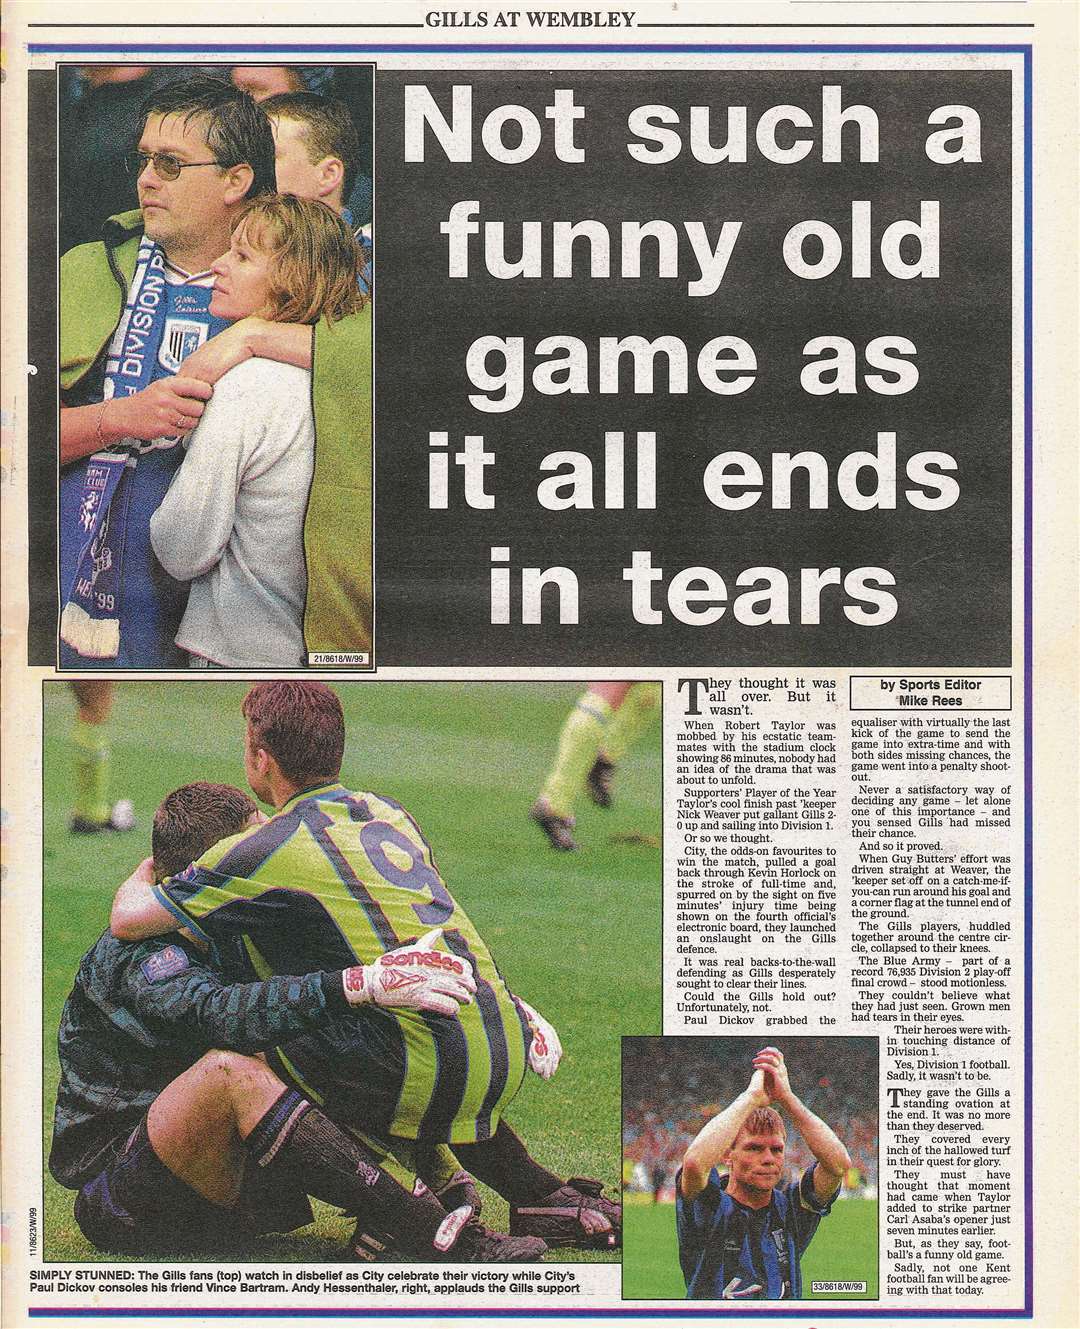 How our daily paper Kent Today reported the game at the time